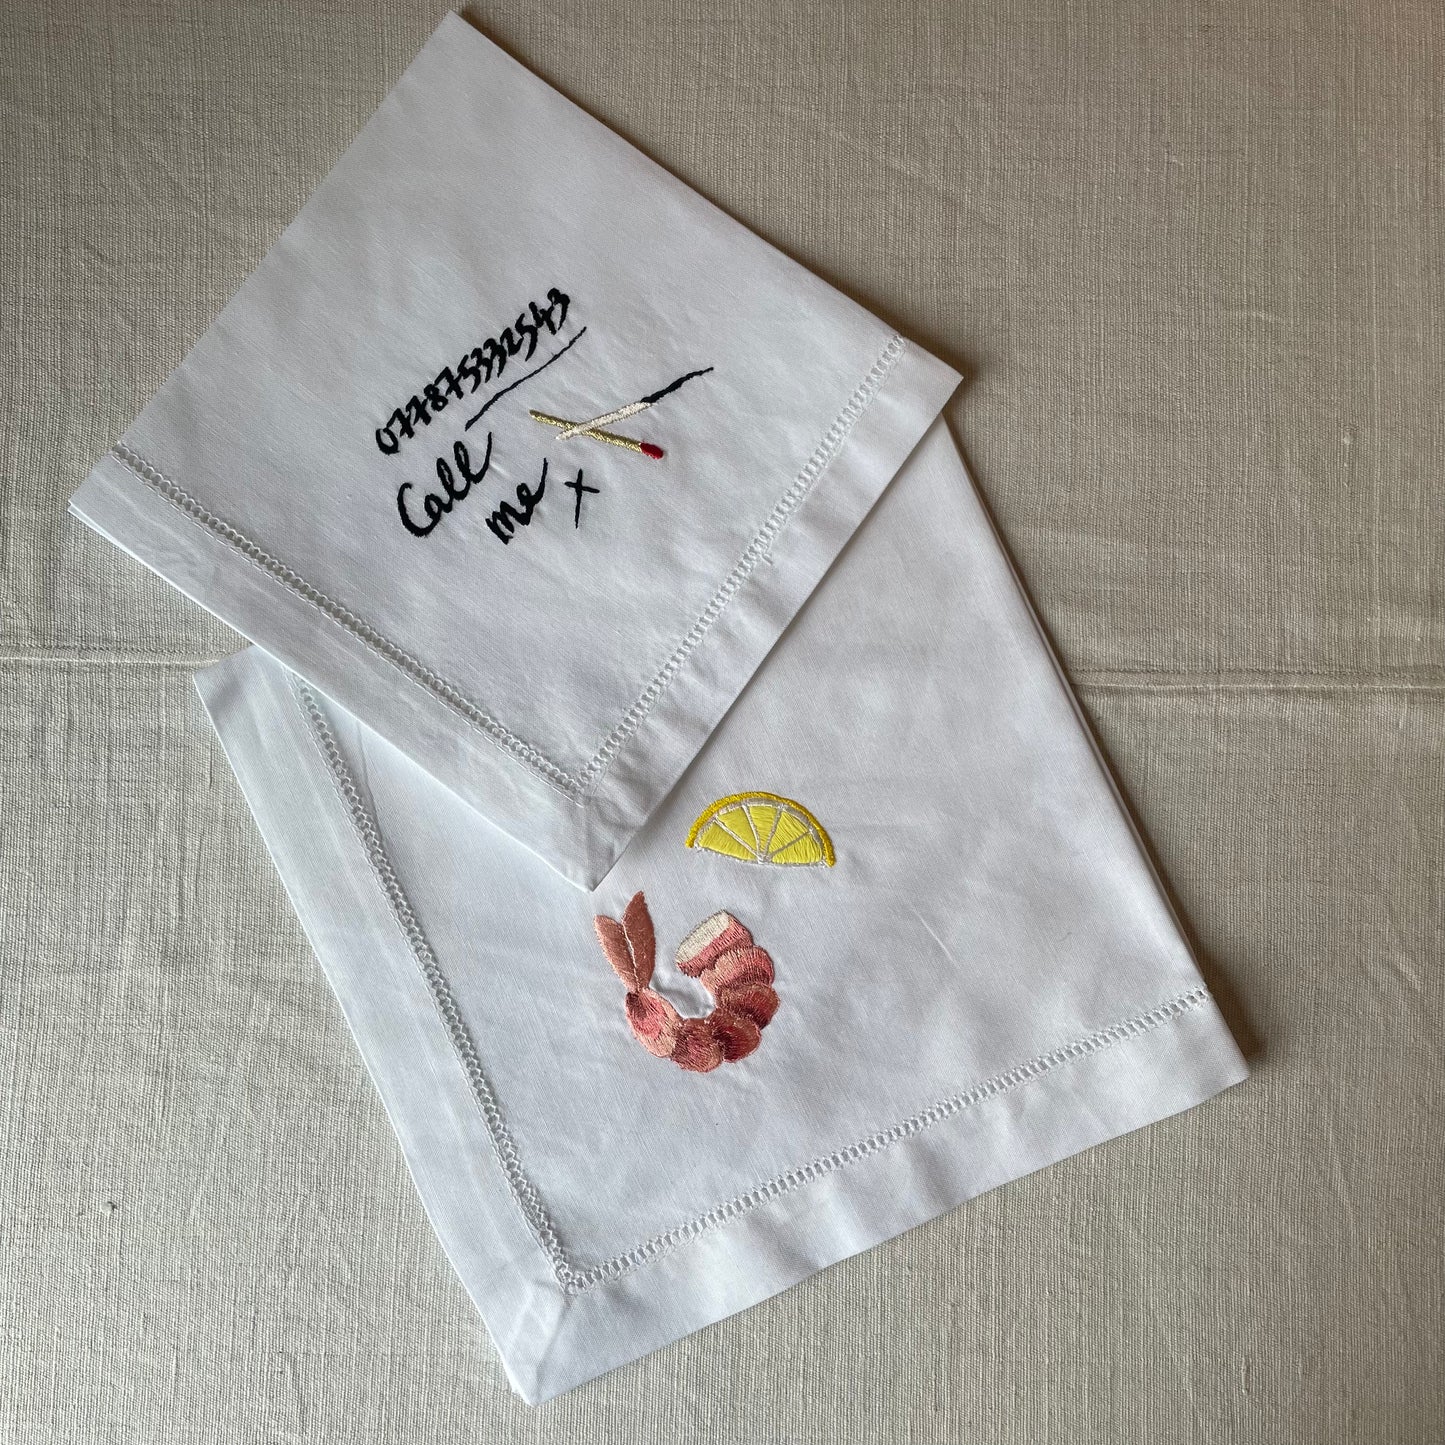 White napkin with the words 'call me', a collection of numbers and a two matchsticks embroidered on. Underneath is another white napkin with an embroidered prawn and lemon on